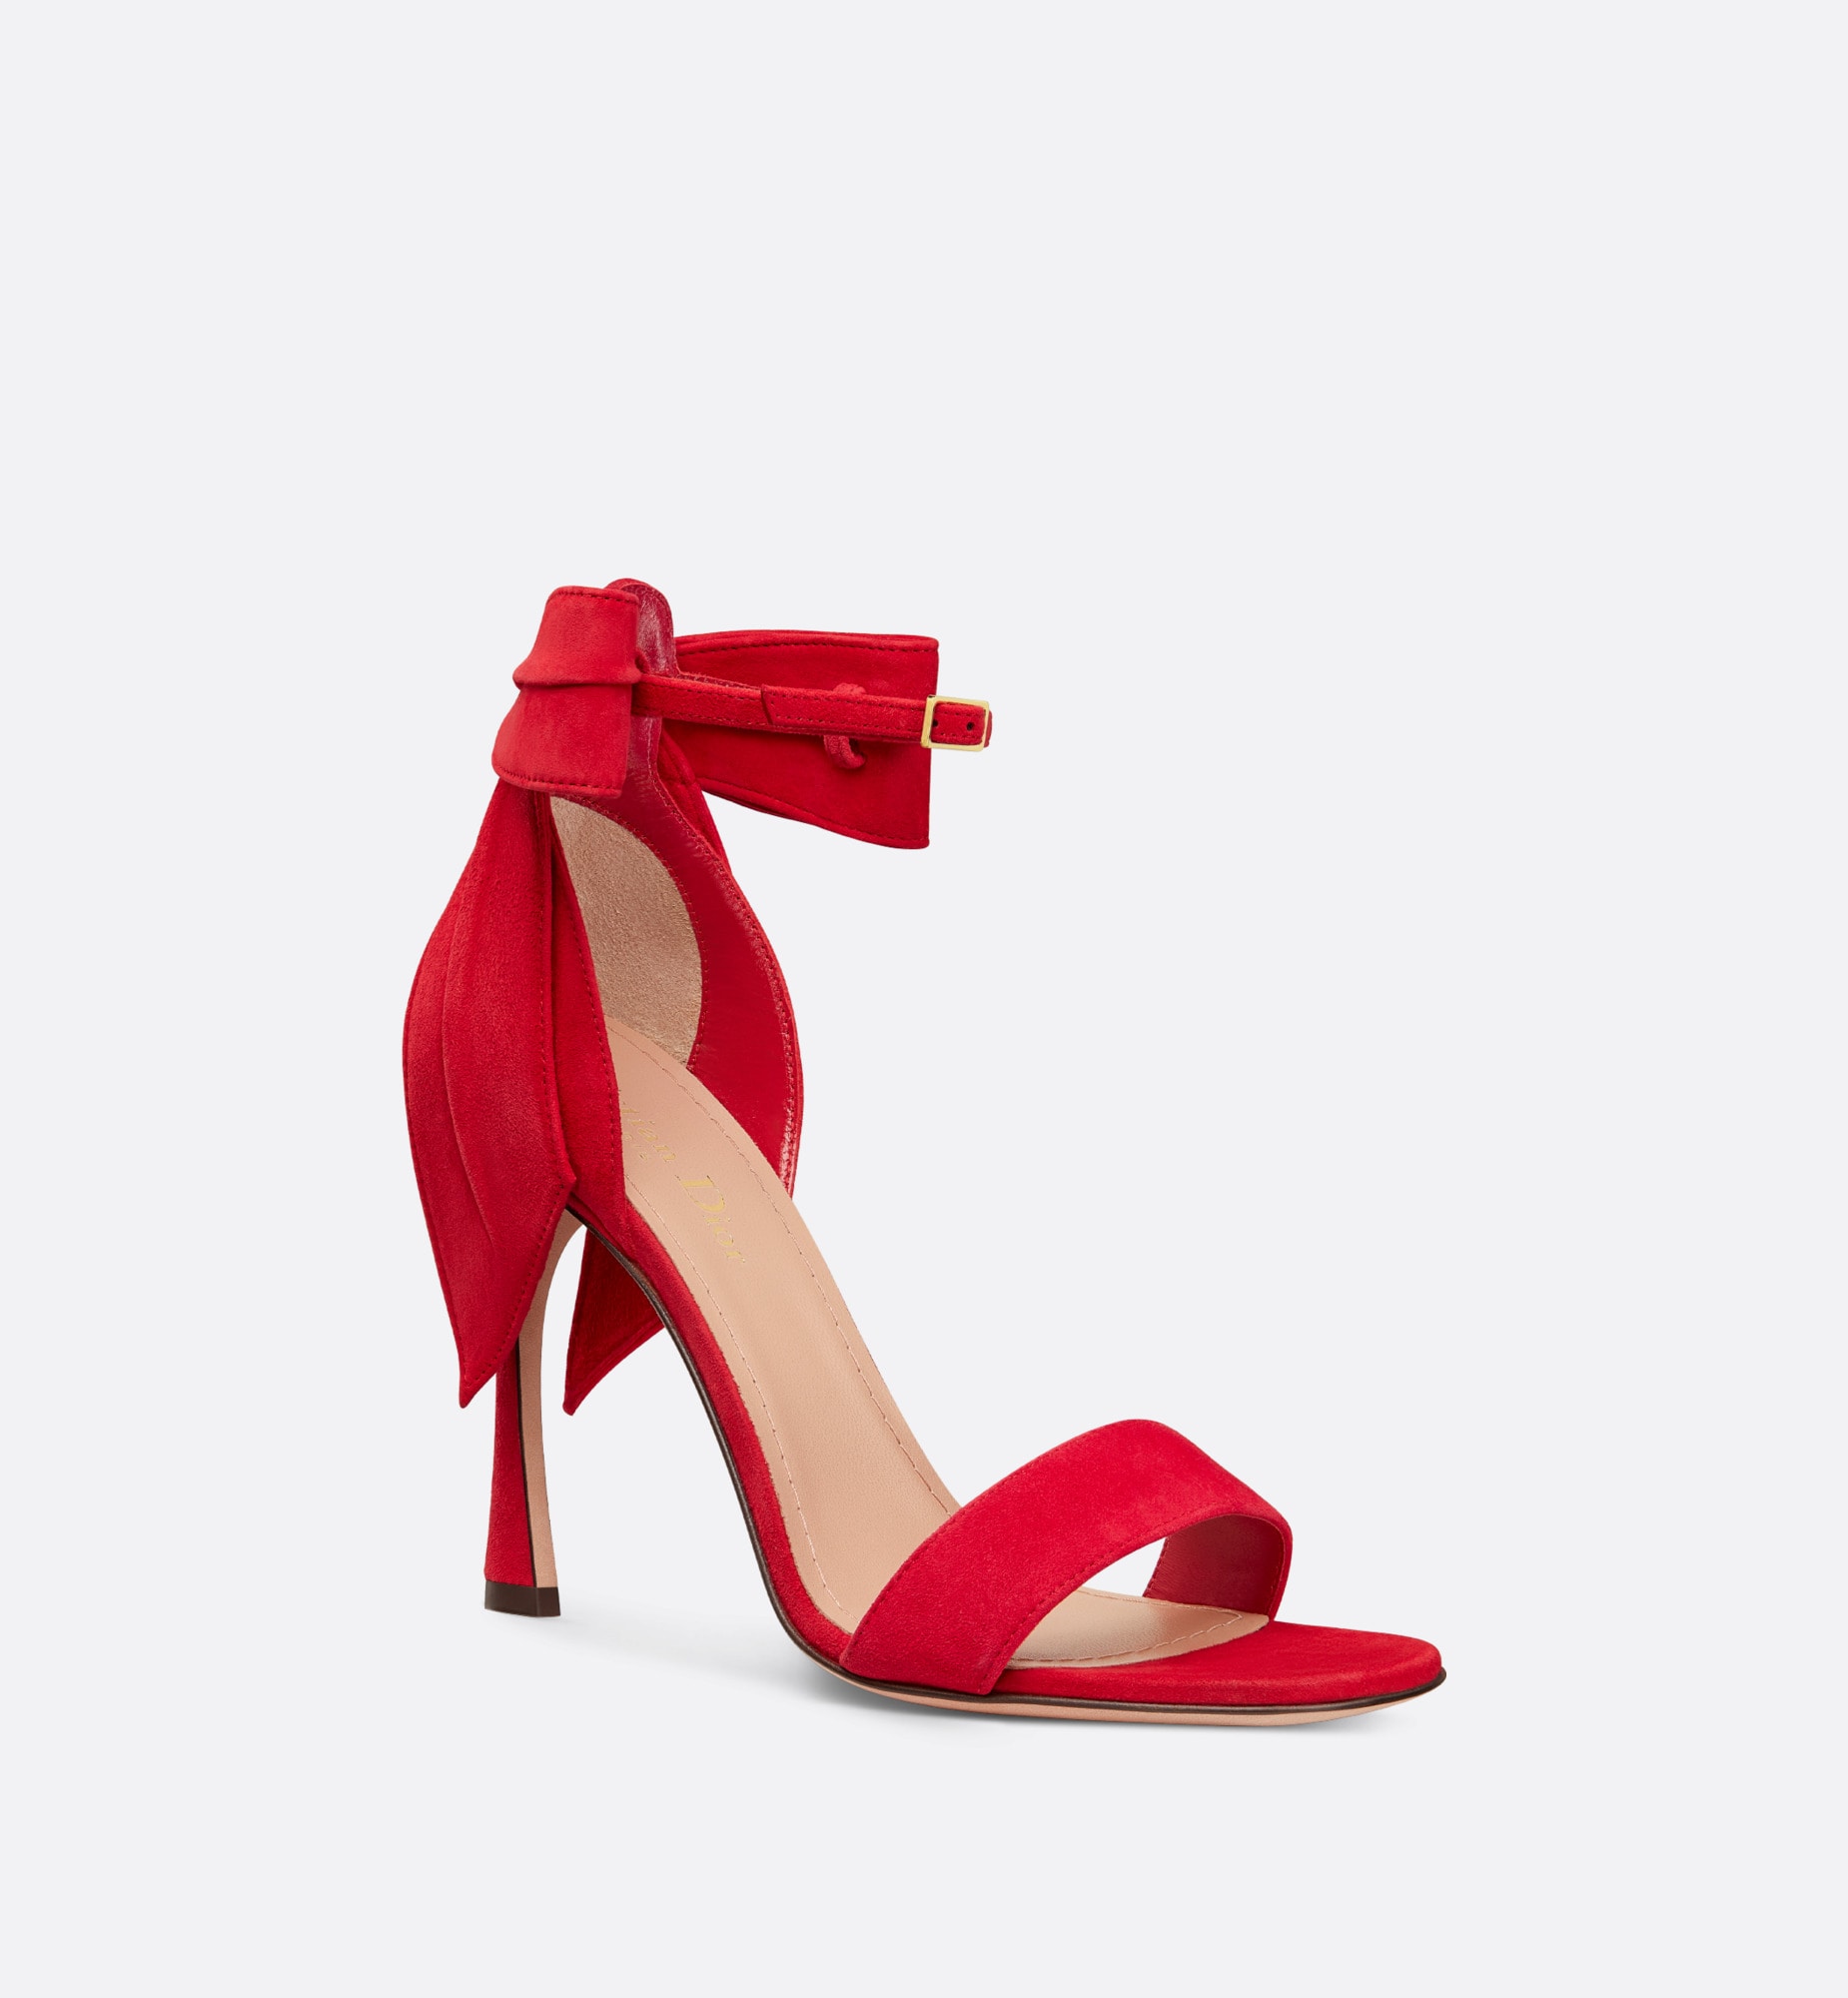 Mlle Dior Heeled Sandal Amaryllis Red Suede Calfskin dior heels red dior sandals red christian dior sandals red